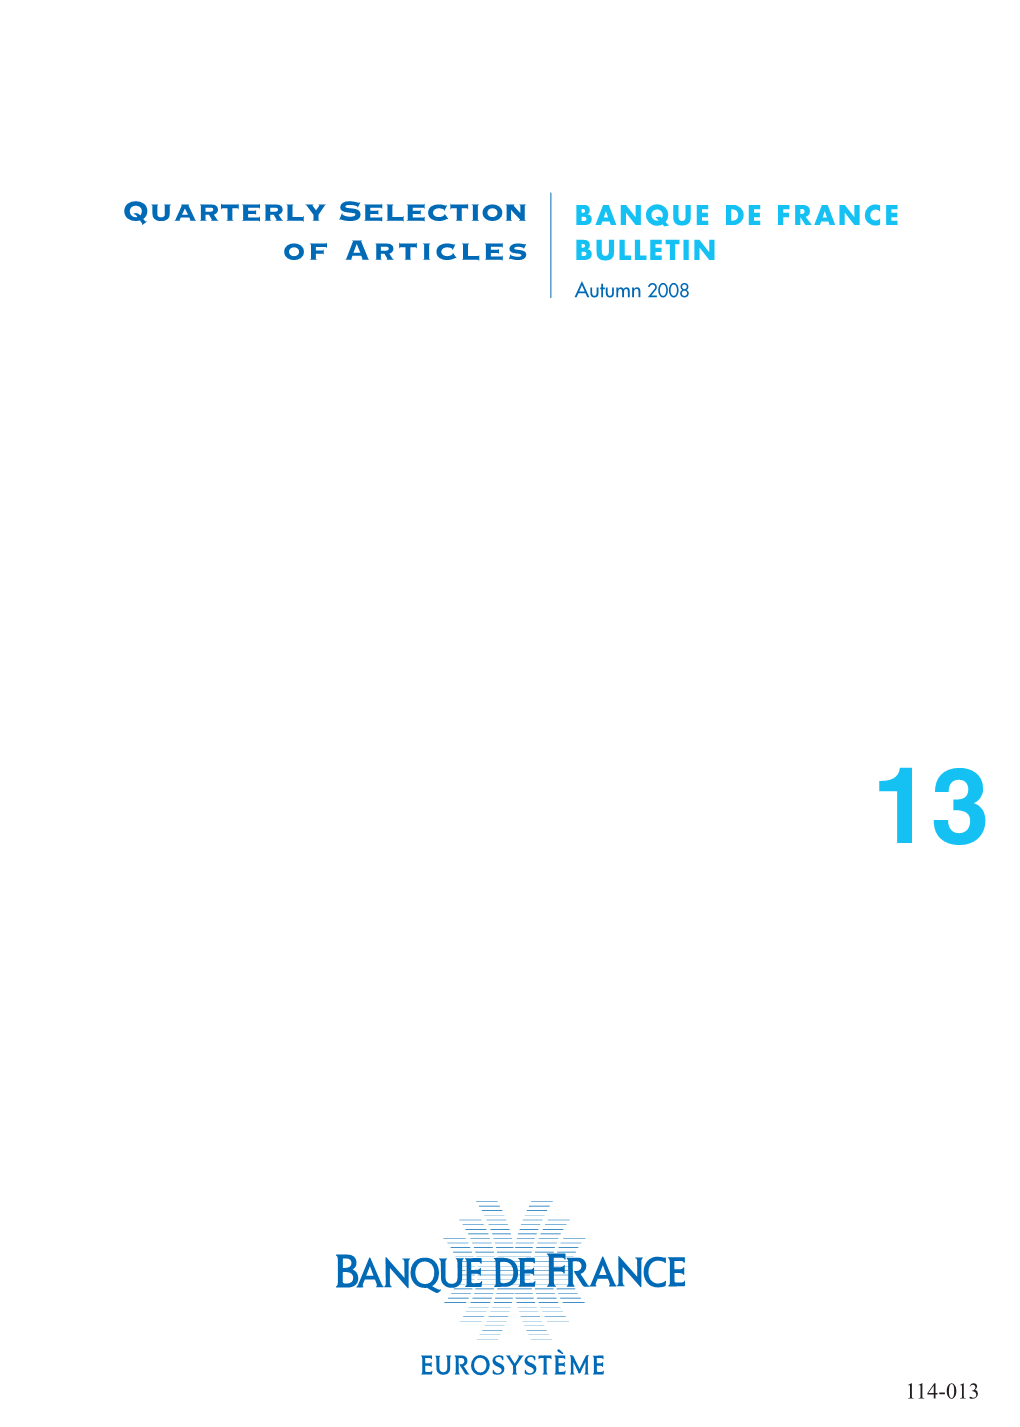 Quarterly Selection of Articles of the Banque De France